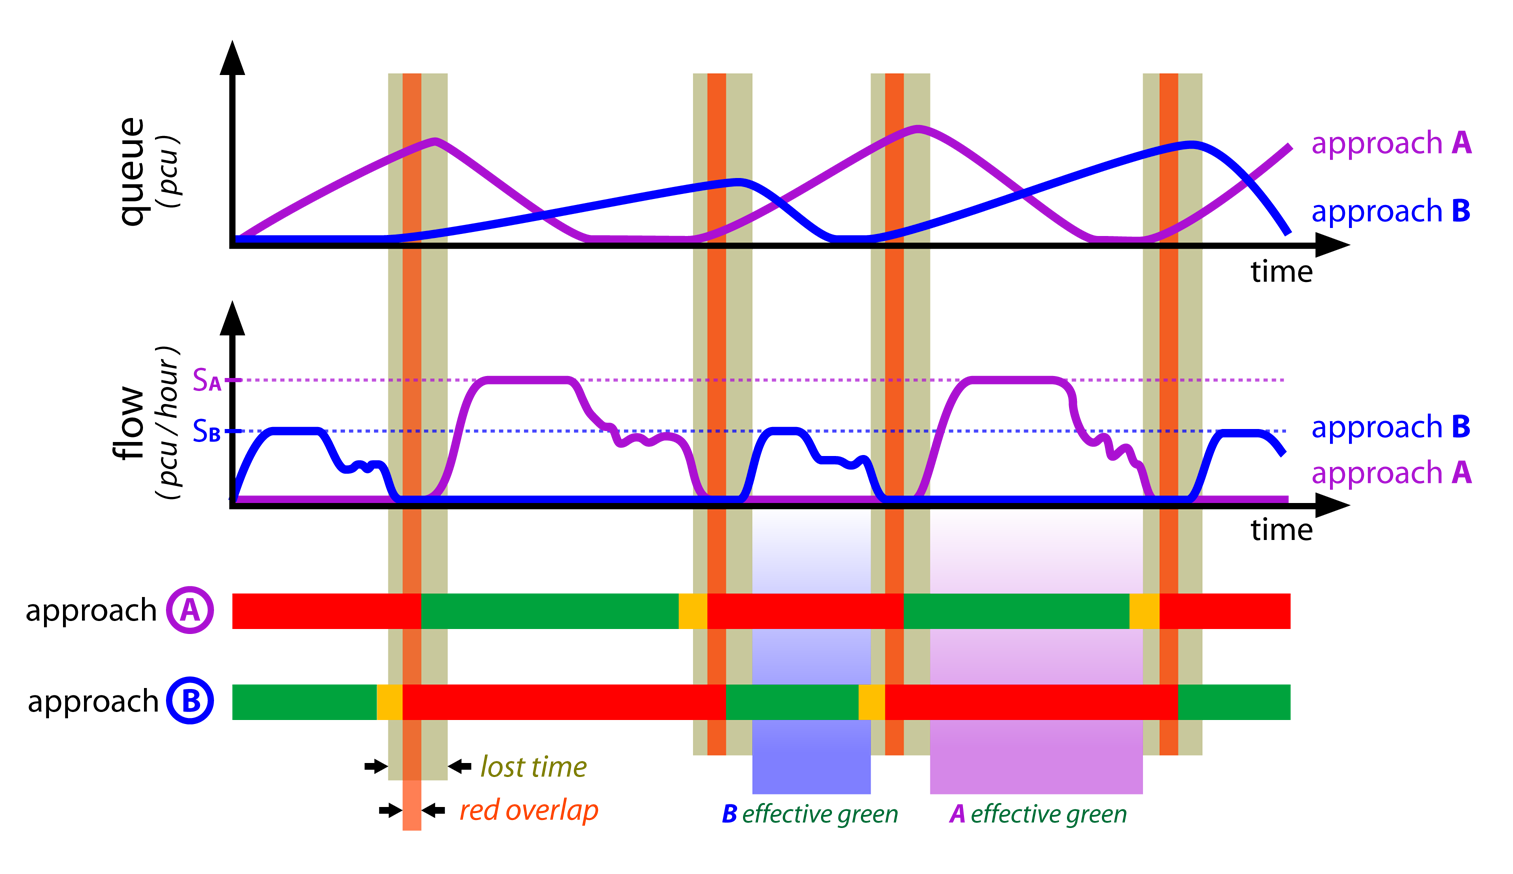 Fig. 24.7 For each approach during effective green time, flow starts at saturation until the queue dissolves or the effective green time turns off. And for each approach during red time, there is queue formation, and lost time happens when neither approach has flow.